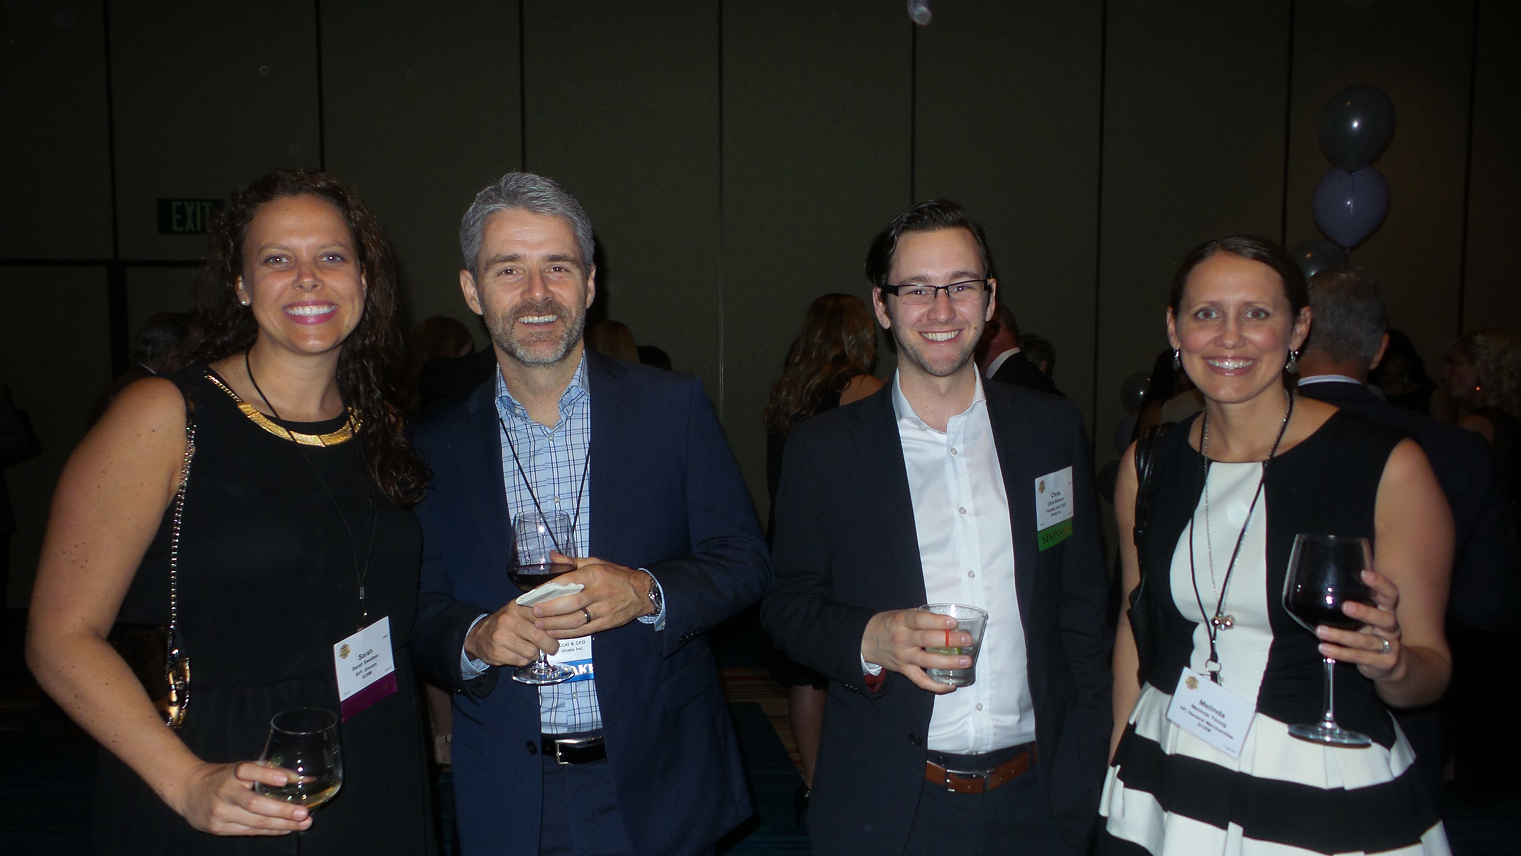 From left: Sarah Sweitzer, Marc Faucher, CFO of event sponsor Unata, Chris Bryson, CEO of Unata, and Melinda Young